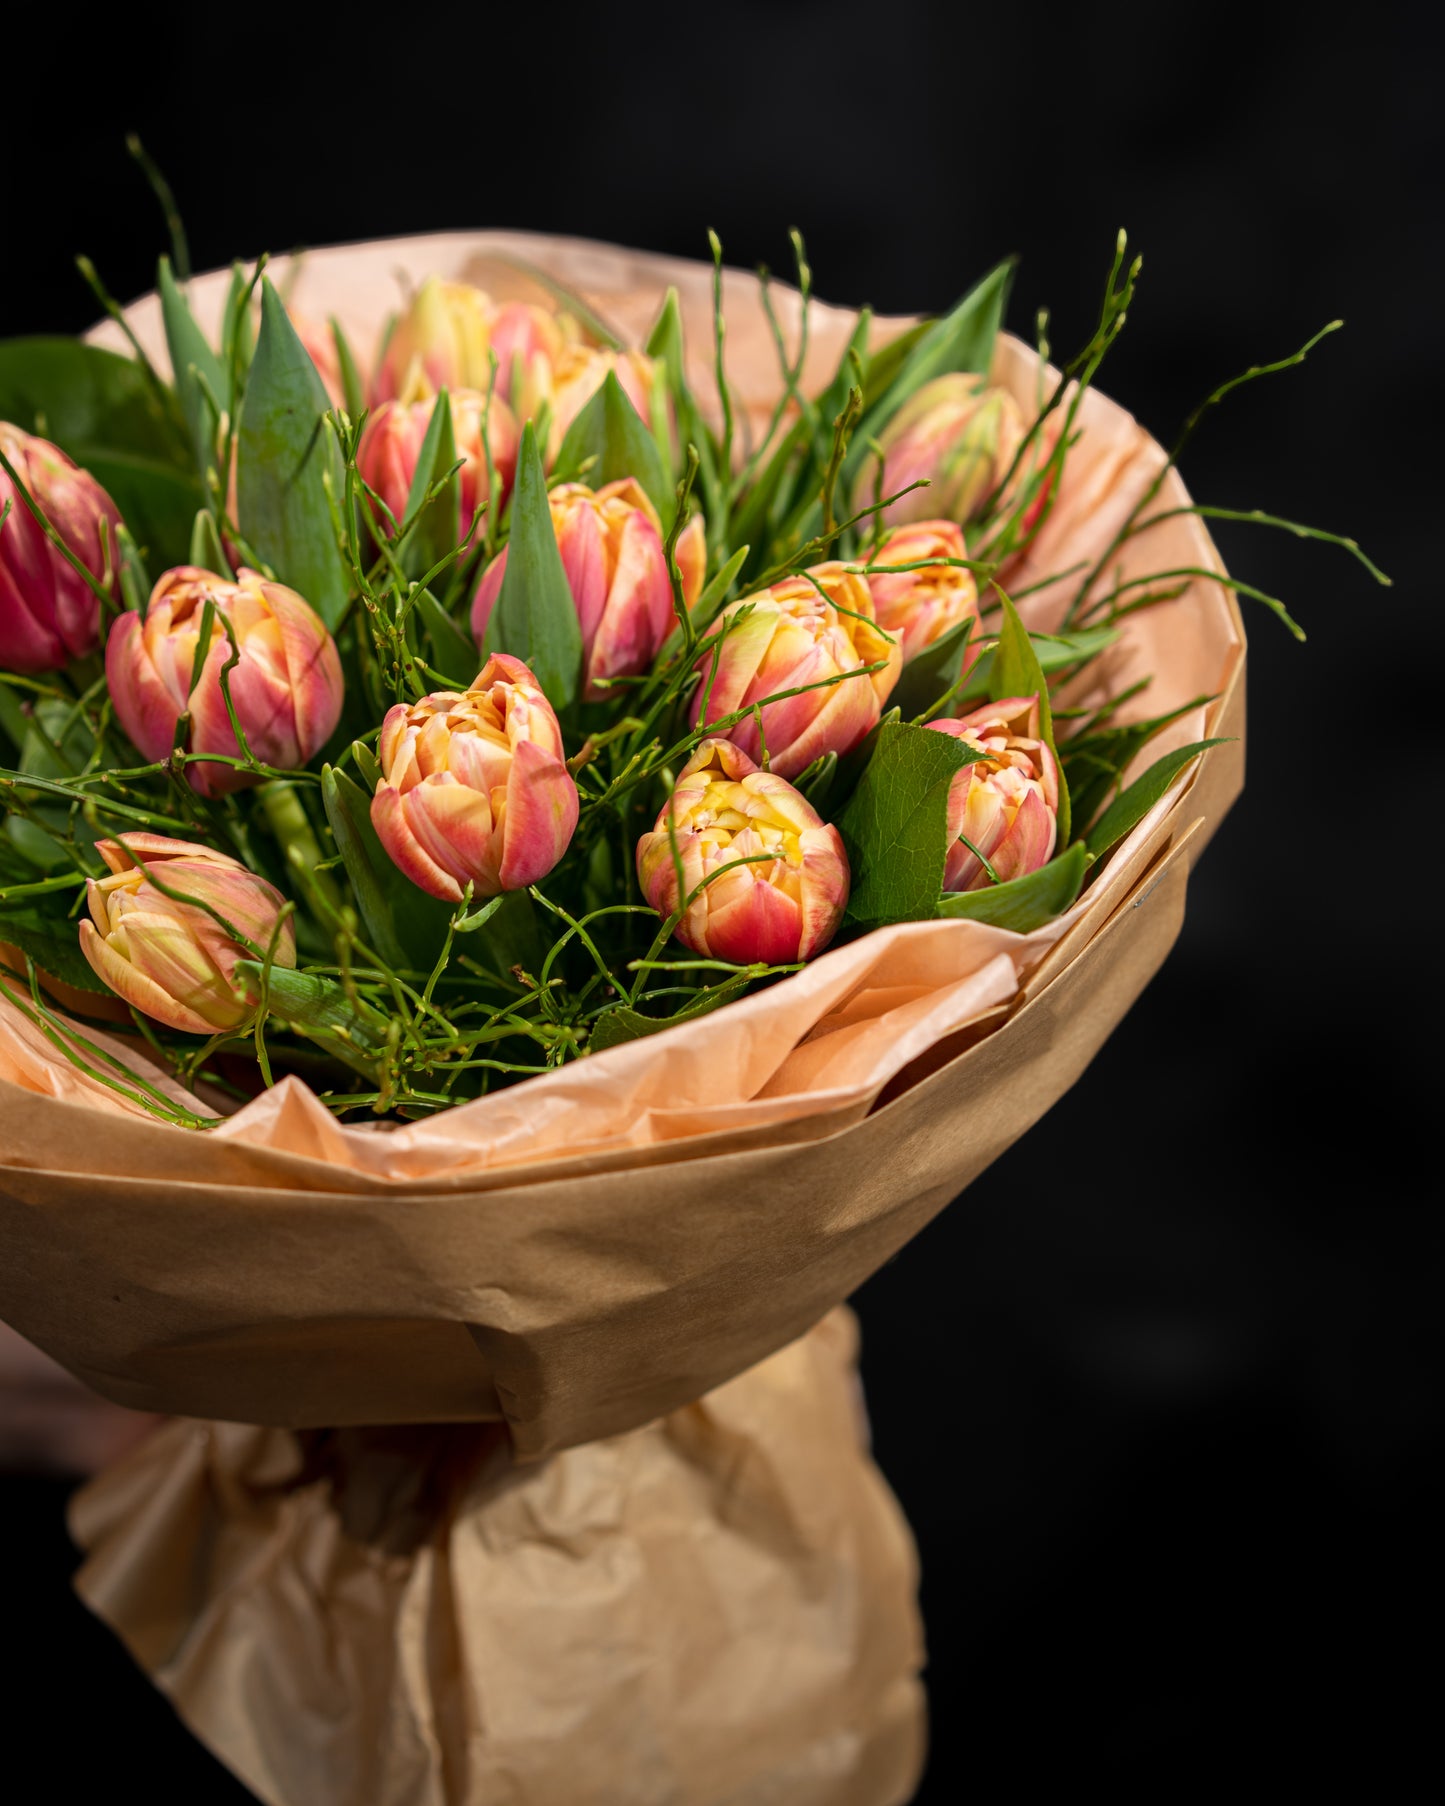 Luxurious tulips, apricot